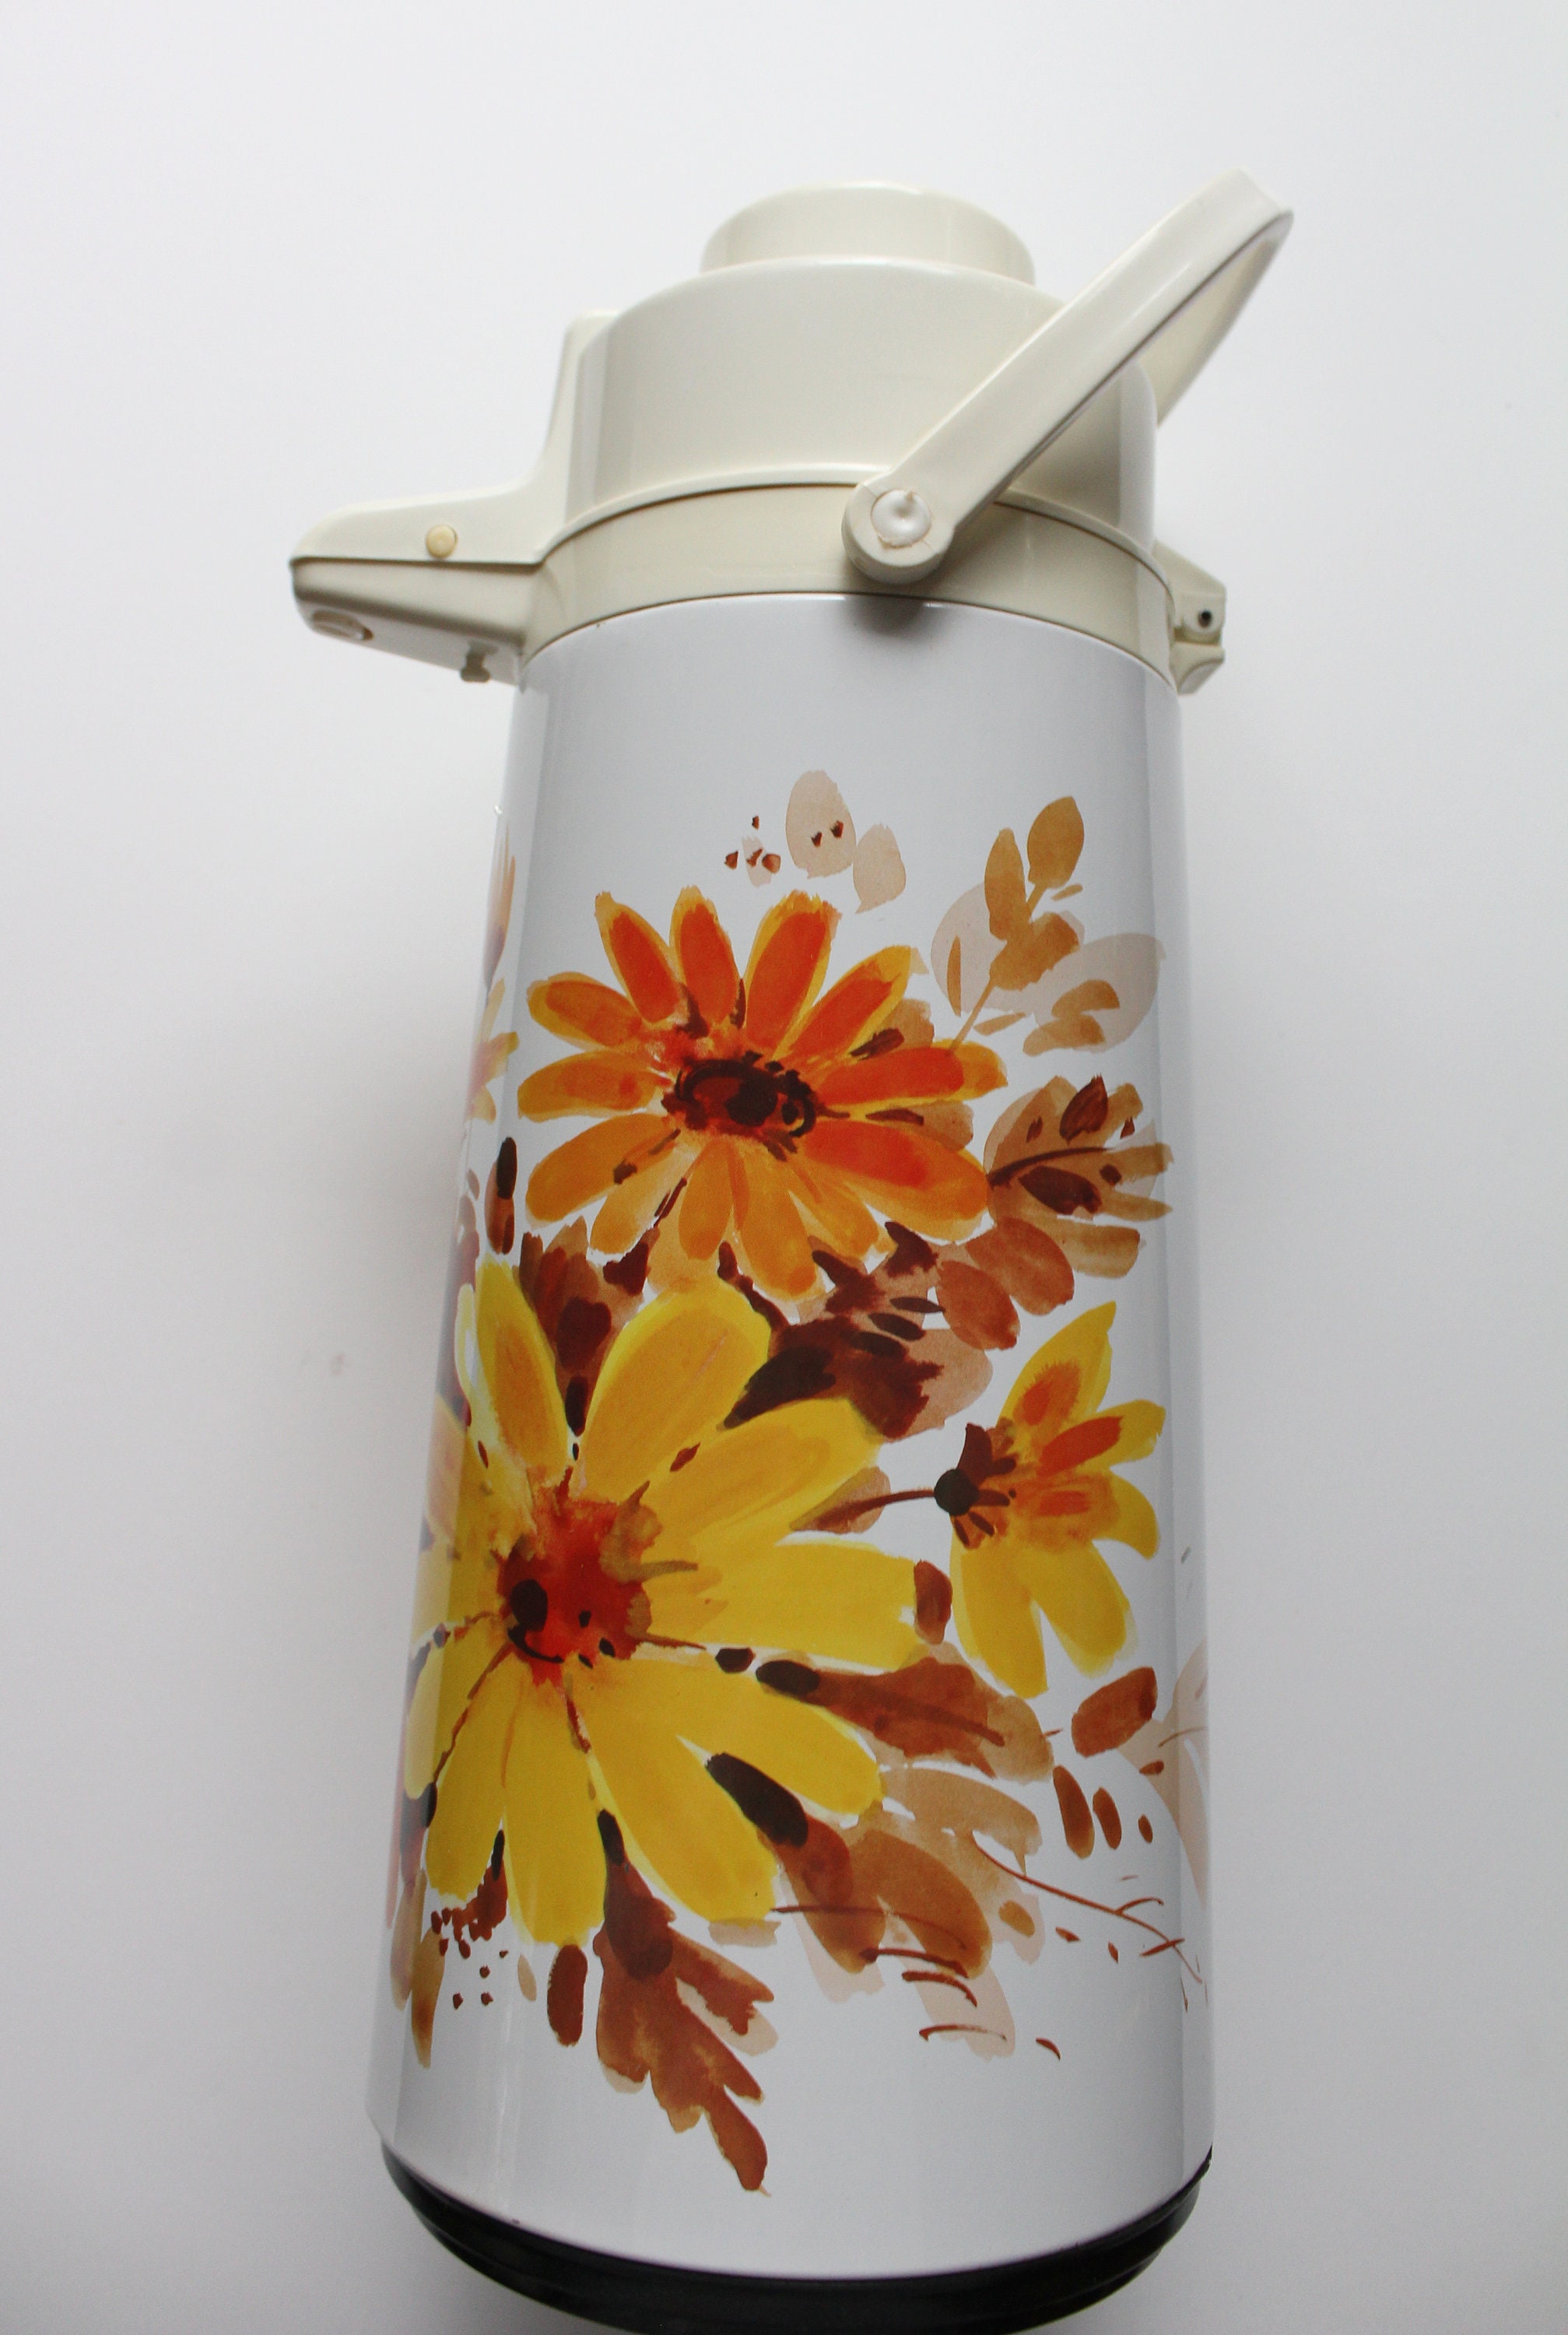 Vintage Rainbow Pump Thermos Large Hot and Cold Beverage Server 